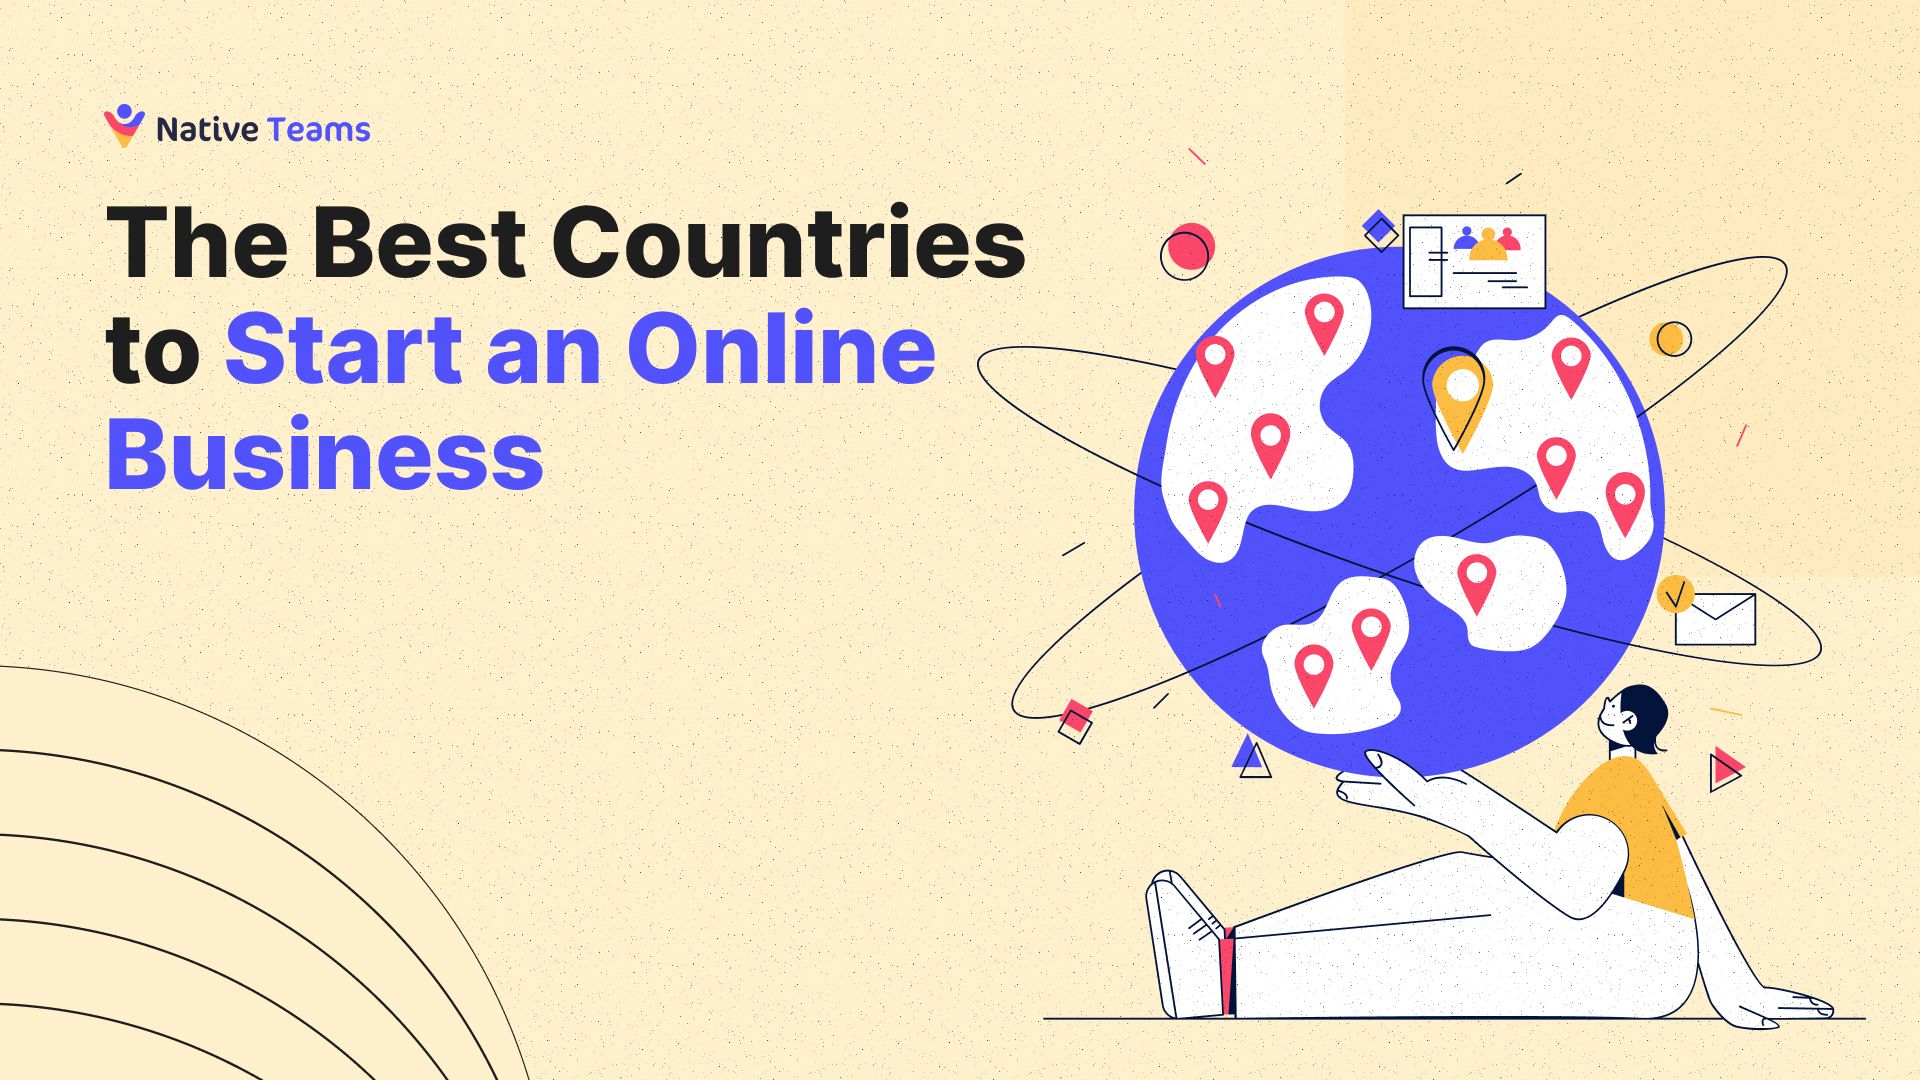 Image from The-Best-Countries-to-Start-an-Online-Business-1024x576